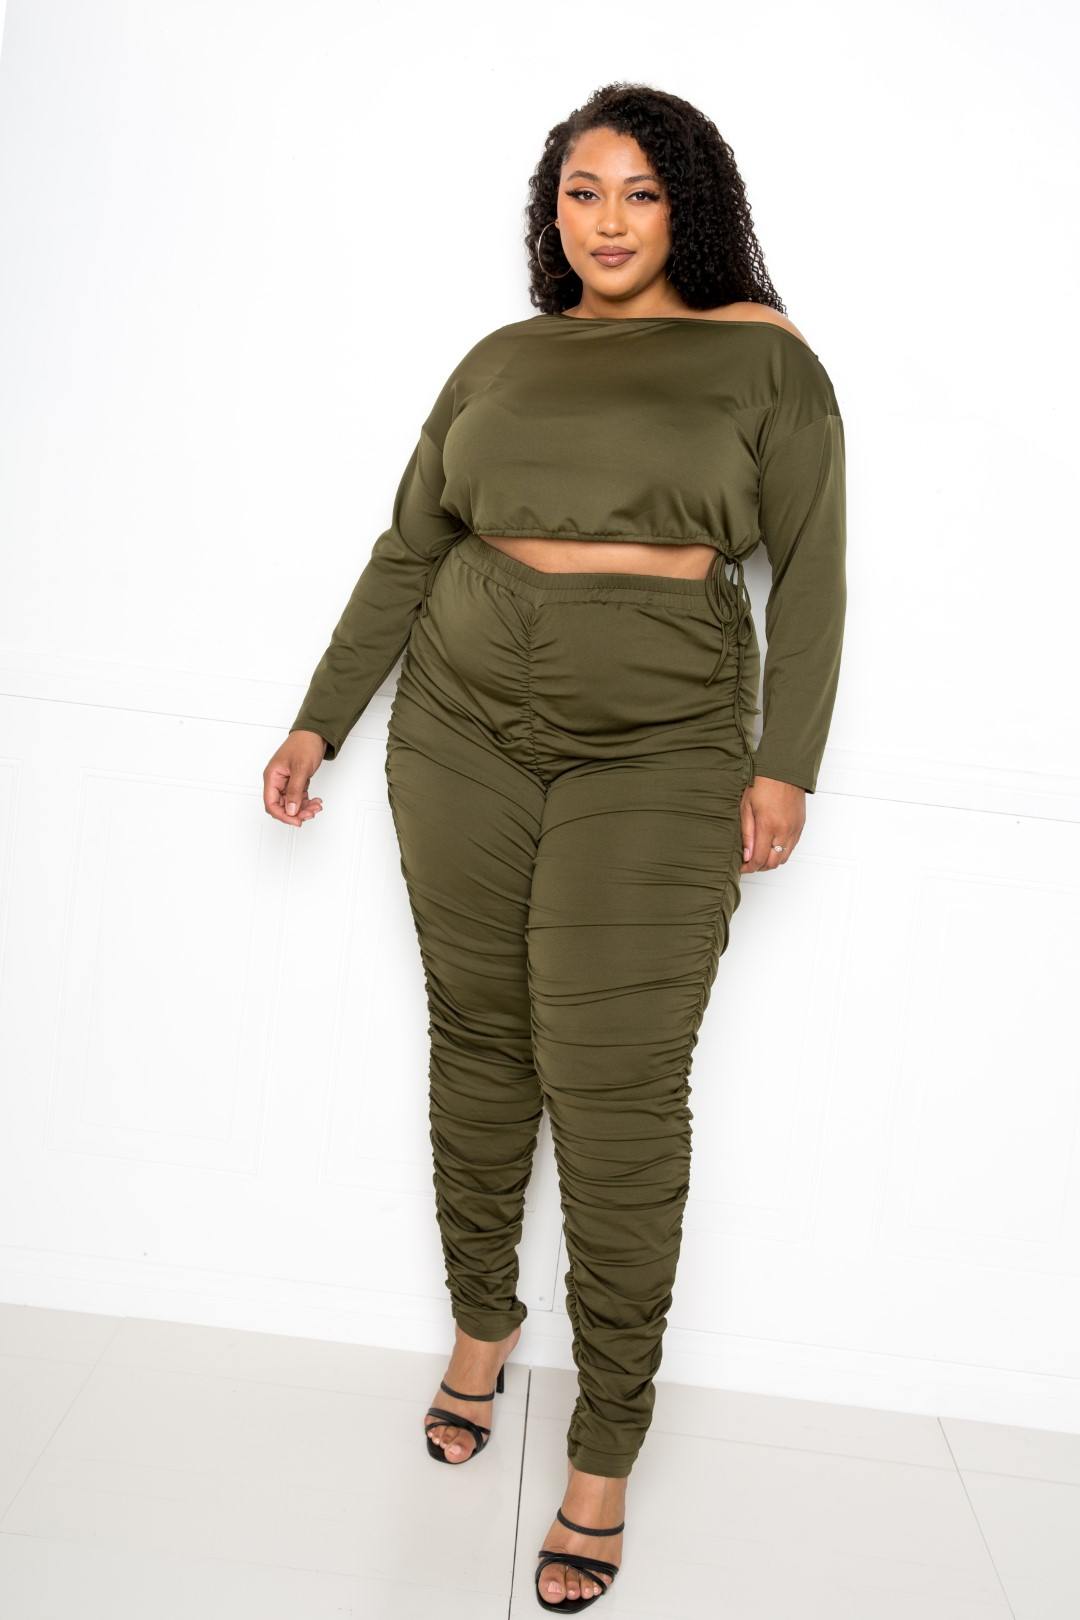 Off Shoulder Cropped Top And Ruched Leggings Sets | Black, Olive, PLUS SIZE, PLUS SIZE SETS, RESTOCKED POPULAR ITEMS, SALE, SALE PLUS SIZE | Style Your Curves